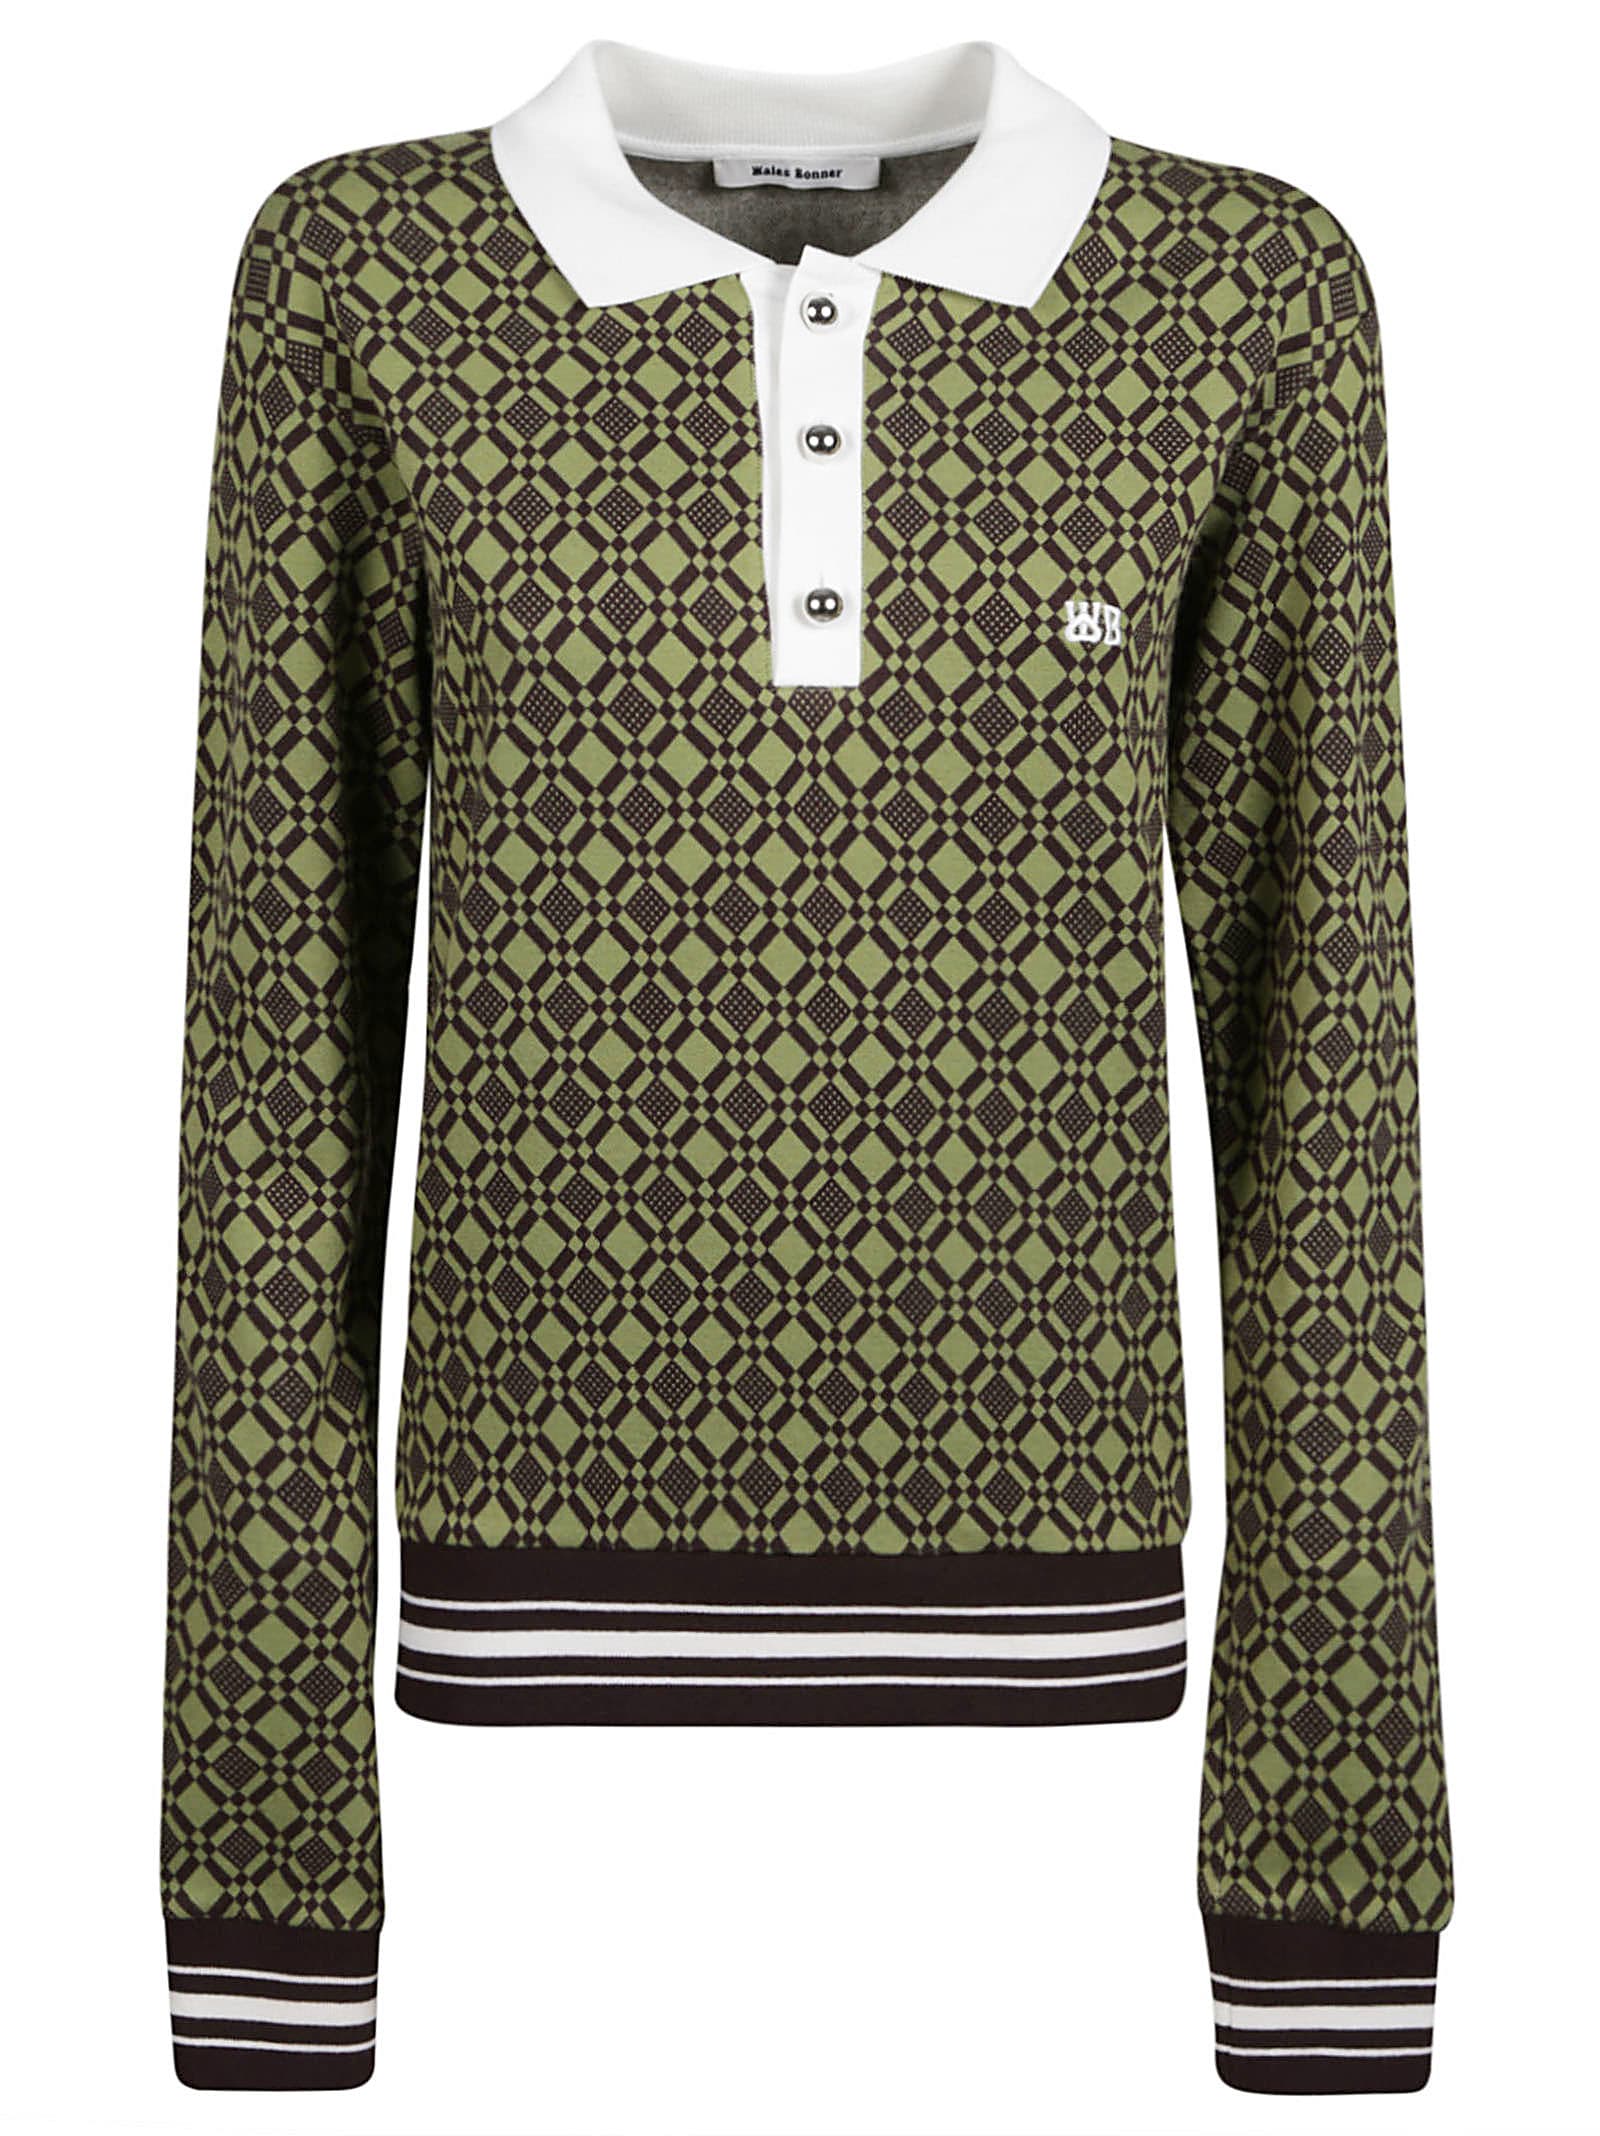 Wales Bonner Cotton Jaquard Power Top In Olive Green